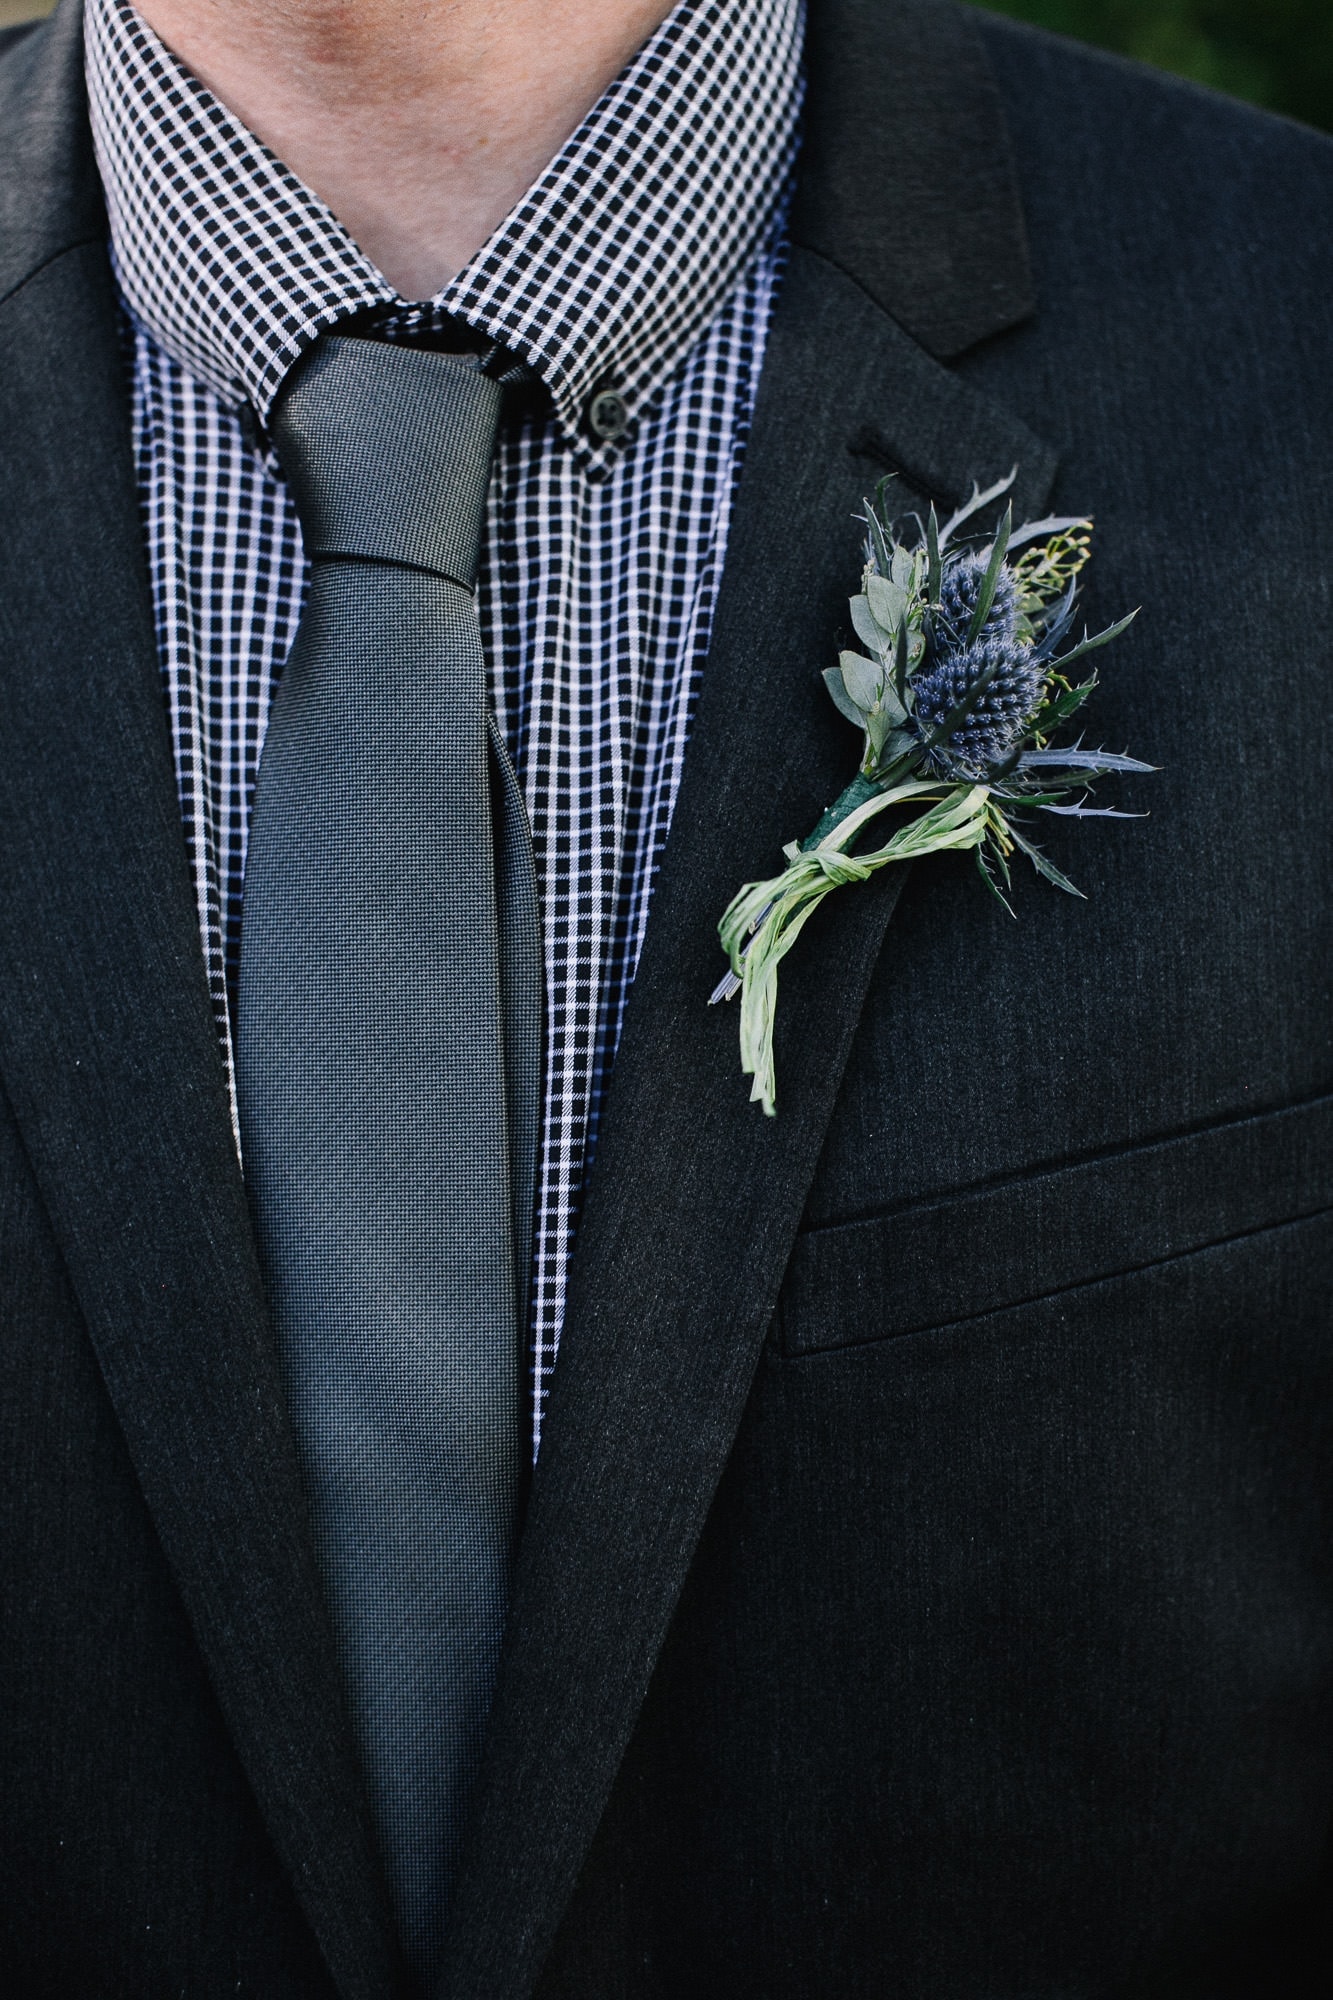 Thistle boutineer with a black and white checkered shirt and grey tie detail photo of groom